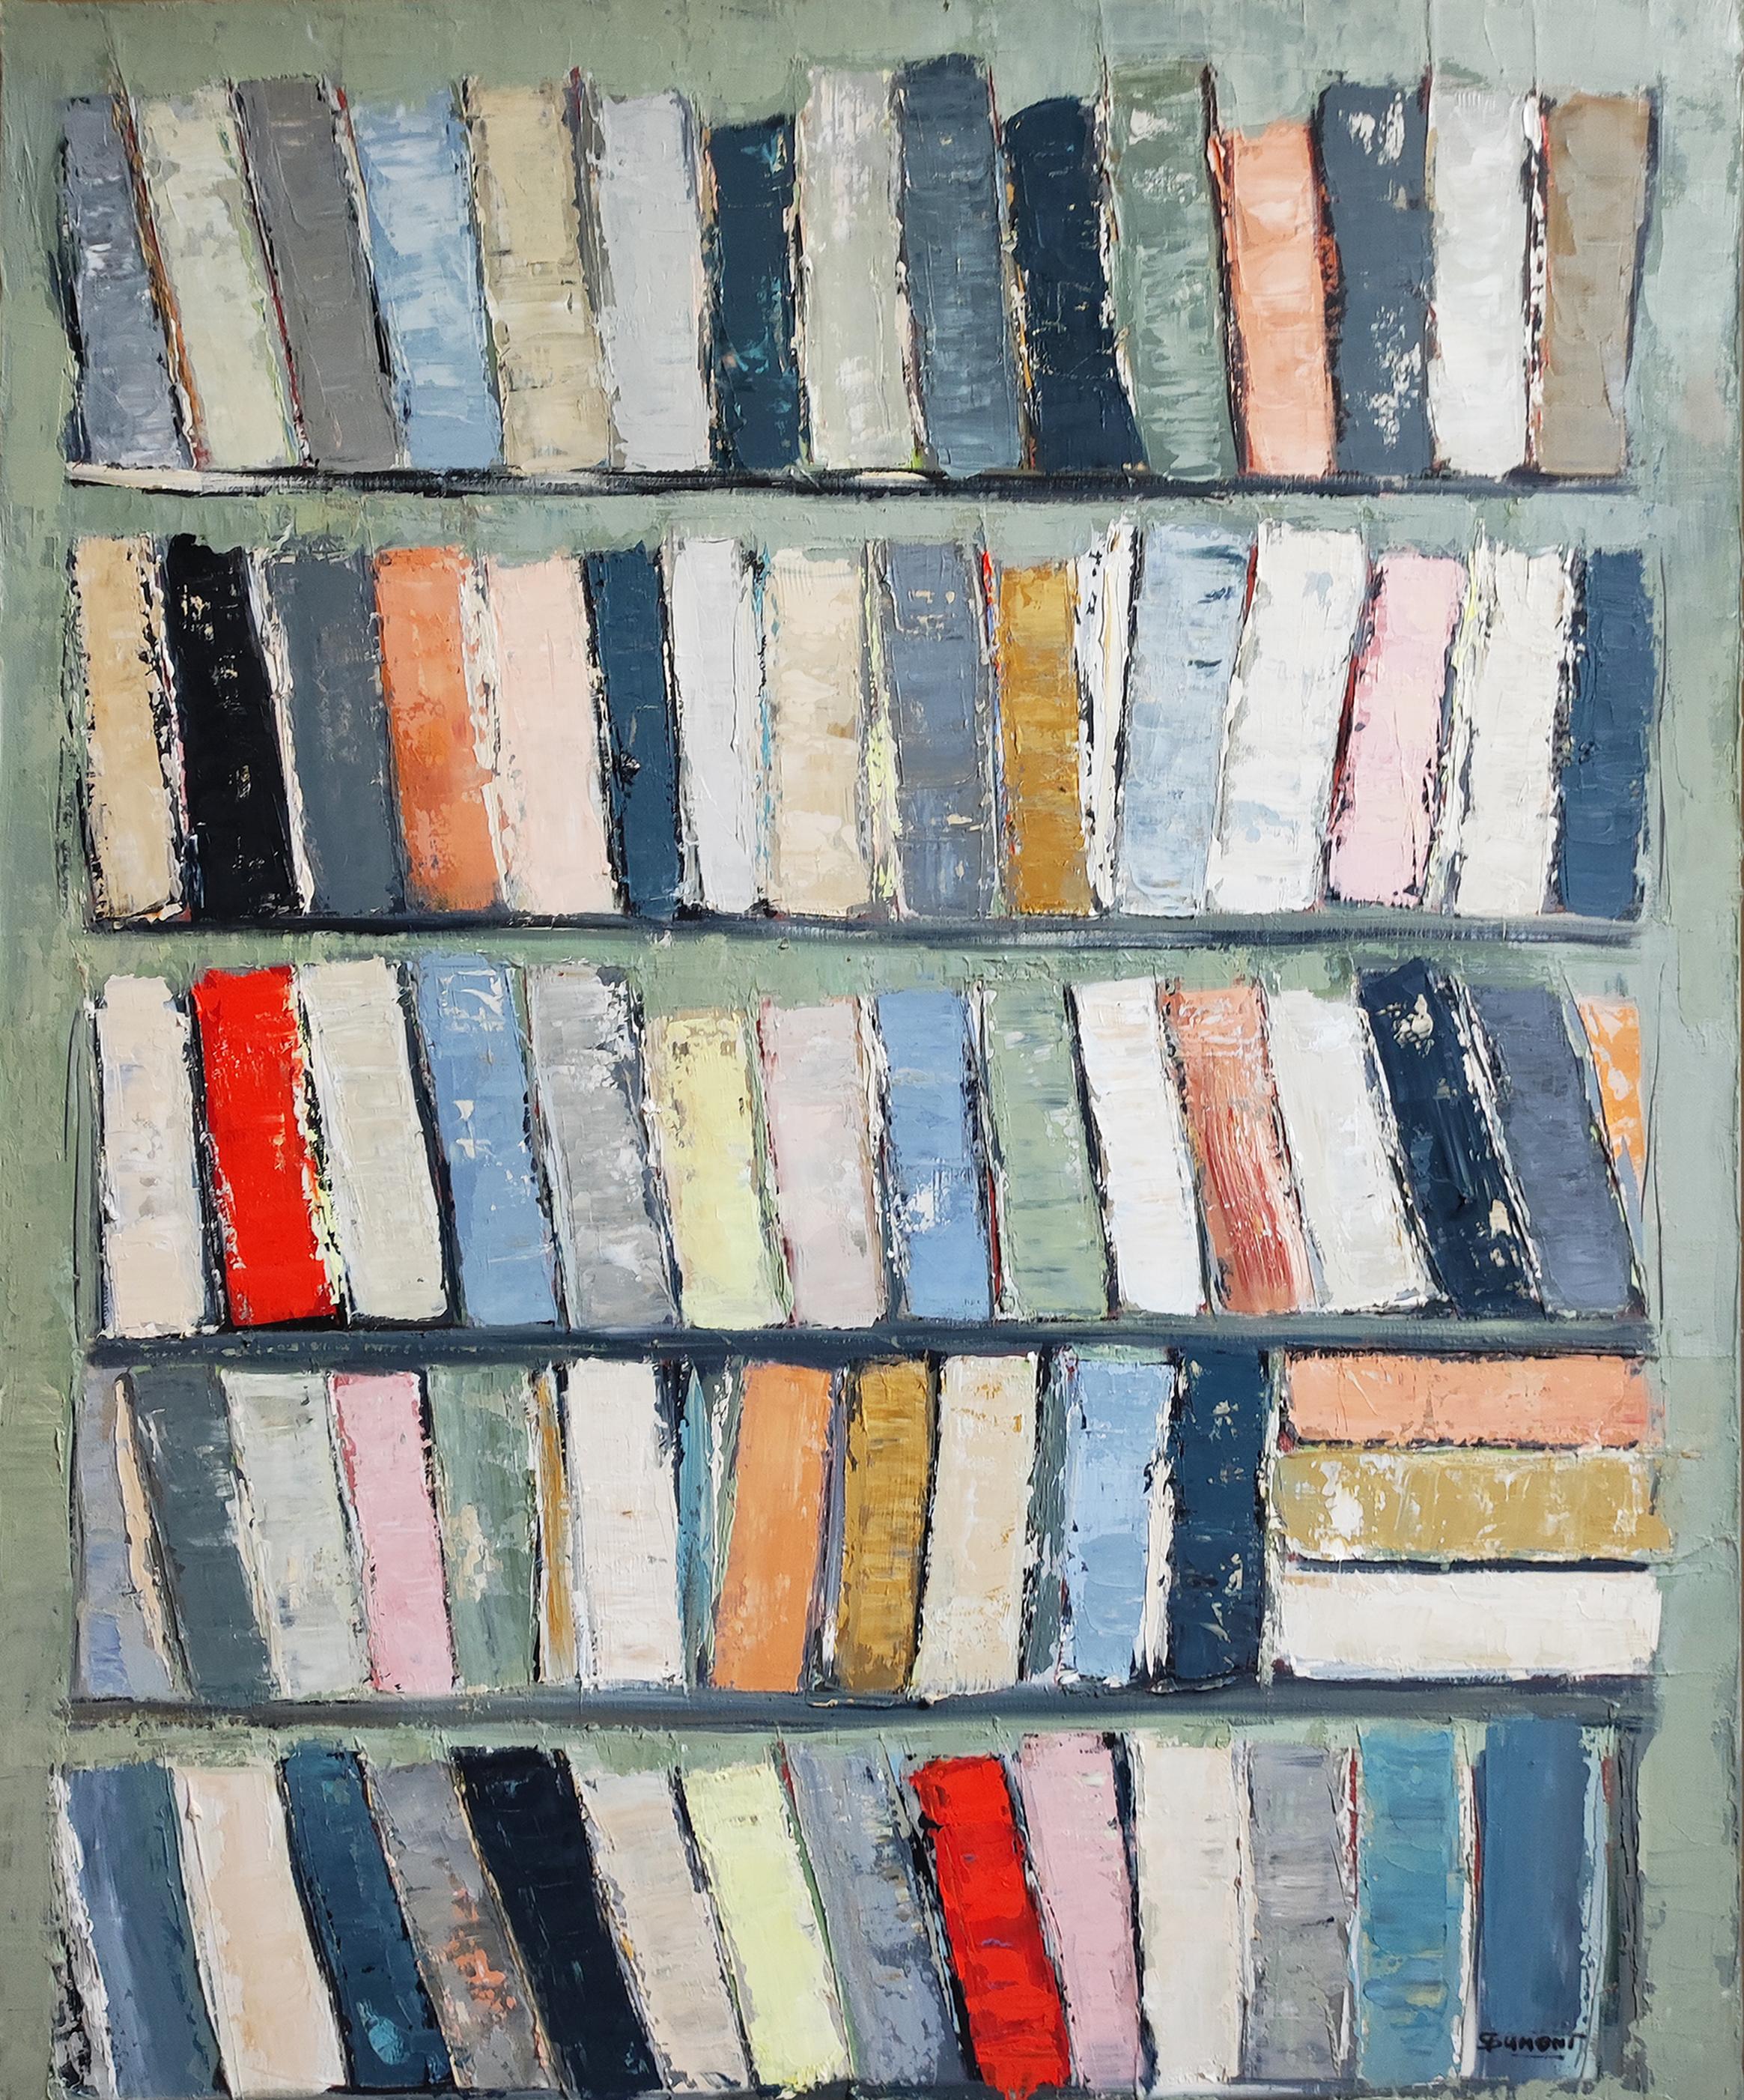 Archives, colors books in library, abstract, expressionism, oil on canvas, green - Painting by SOPHIE DUMONT